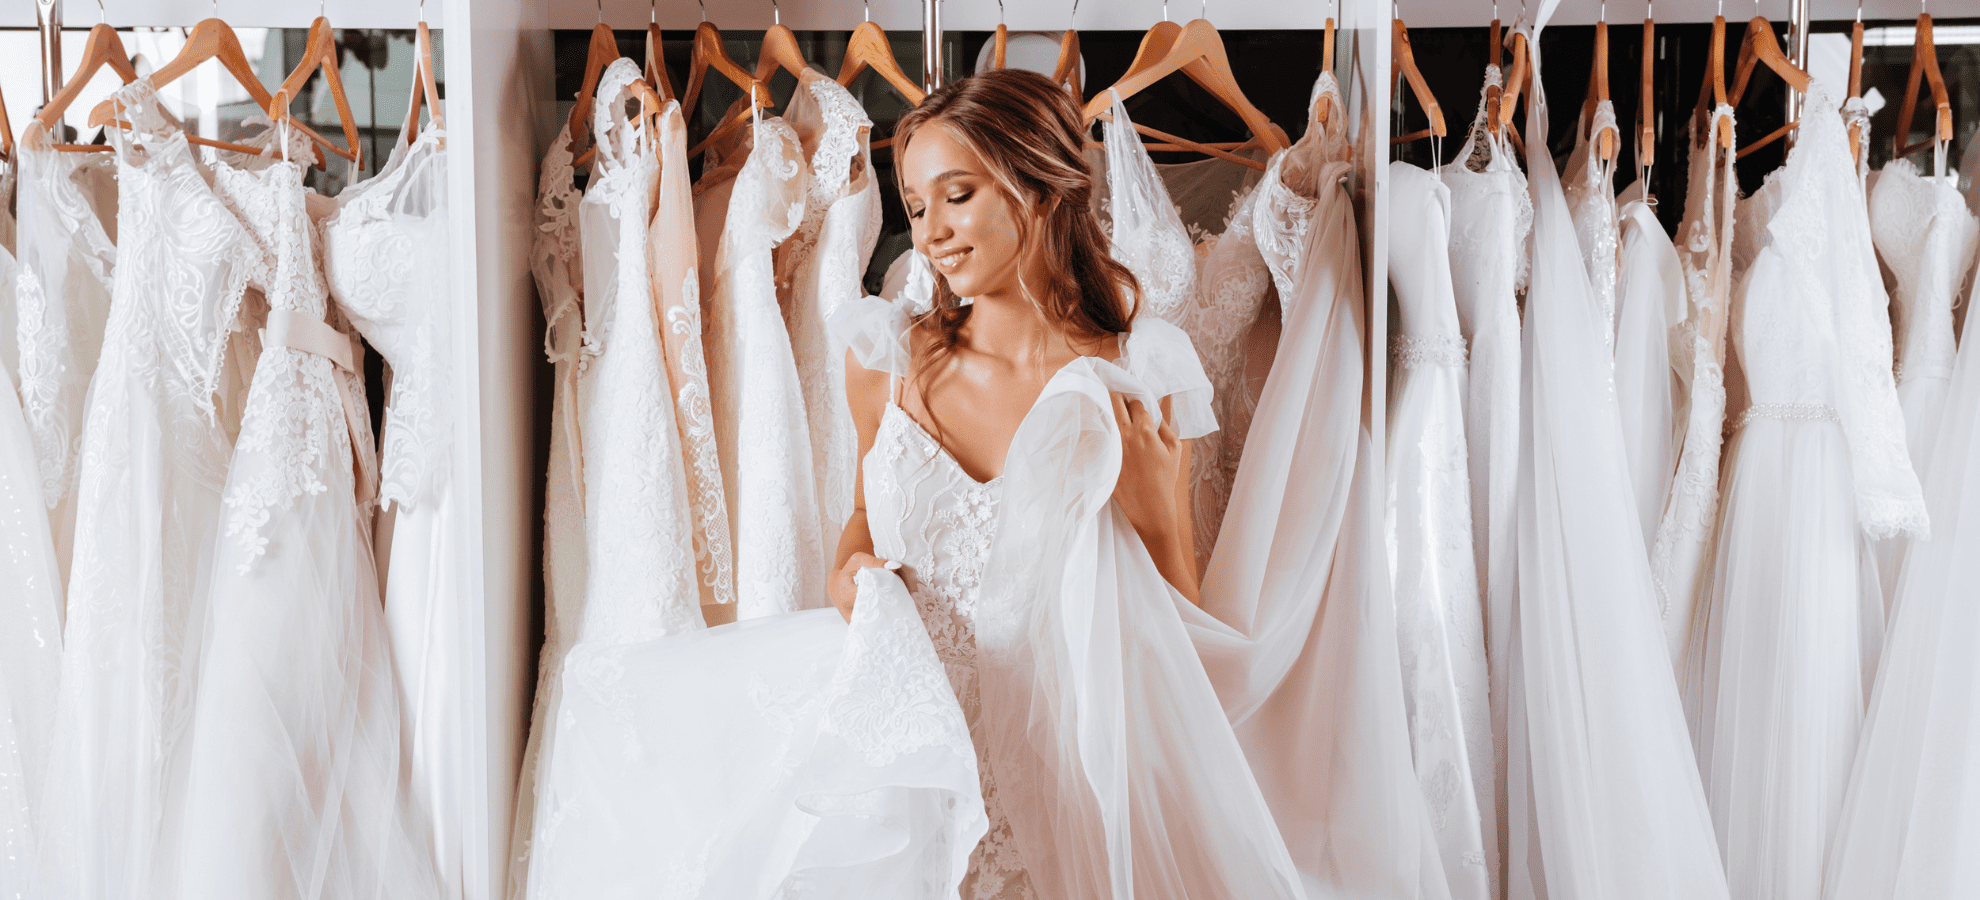 A woman stands in front of a rack filled with white wedding dresses at one of the Myrtle Beach bridal boutiques, holding up one of the dresses and smiling. The dresses have various lace patterns and designs, and the woman looks happy and elegantly dressed in a white lace gown.